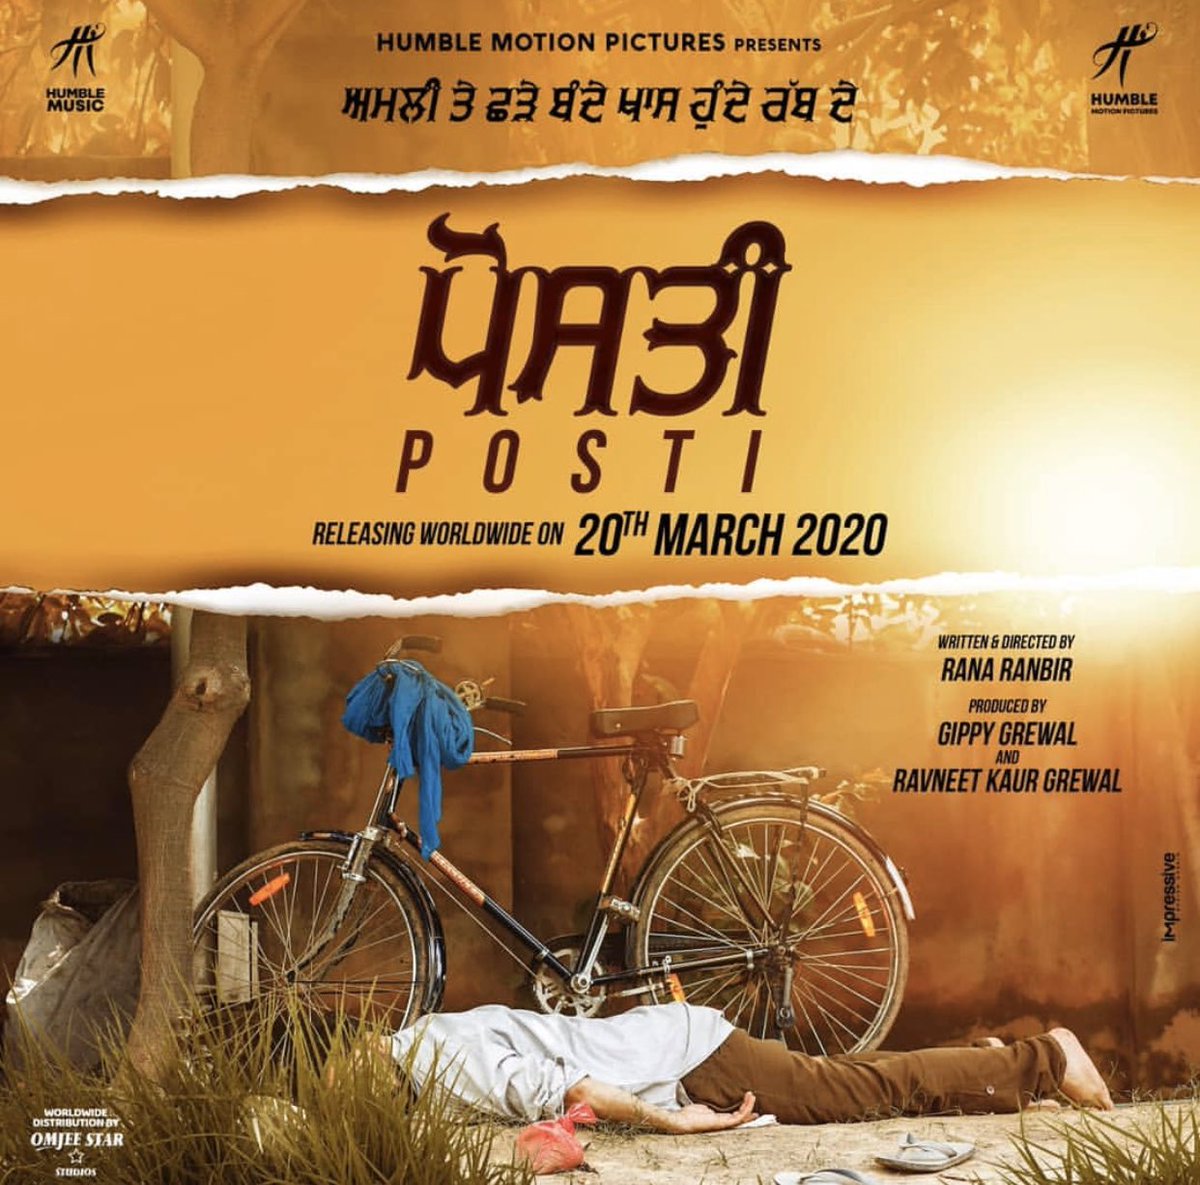 So happy and delighted to be a part of this project @gippygrewal @officialranaranbir @humblemotionpictures 
My heart full of gratitude 😇🙏🏻 #mynext #punjabifilm #posti #punjabicinema #gratitude #almighty 😇🙏🏻